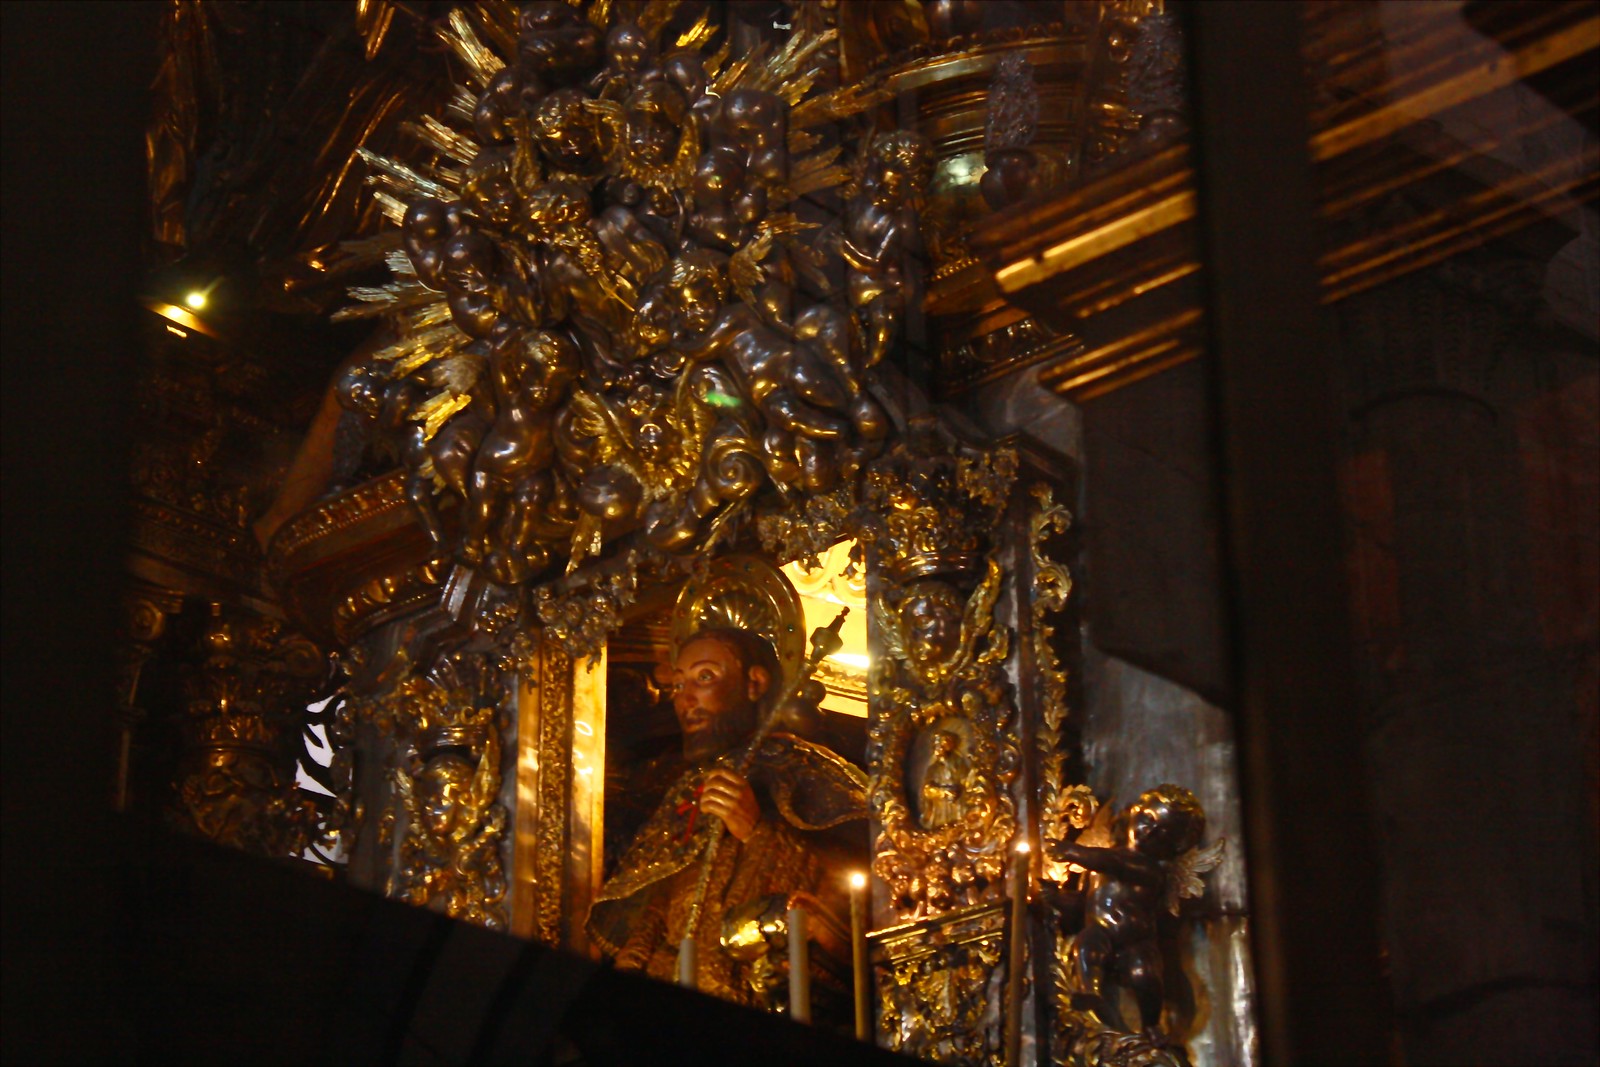 Statue of the apostle St. James in the cathedral of Santiago de Compostela